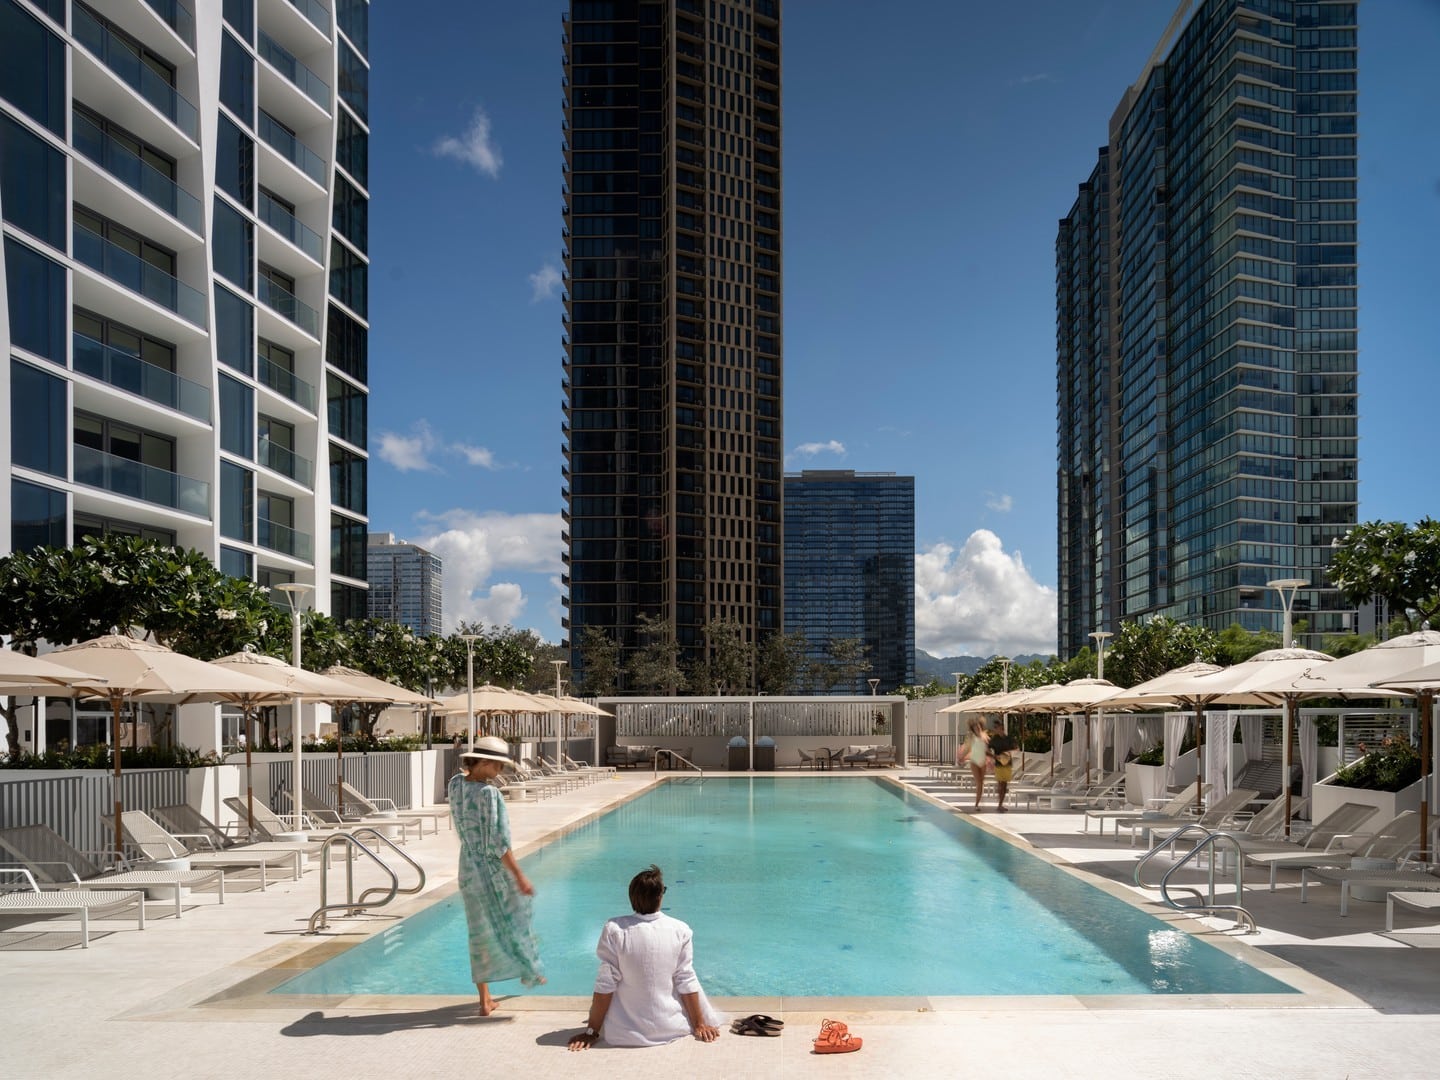 Explore the beautifully curated amenity and leisure spaces on the Level 8 Deck at Kōʻula. Visit the link in our bio to learn more about the Sunset Lounge, resort-style pool and spas, and fitness center.